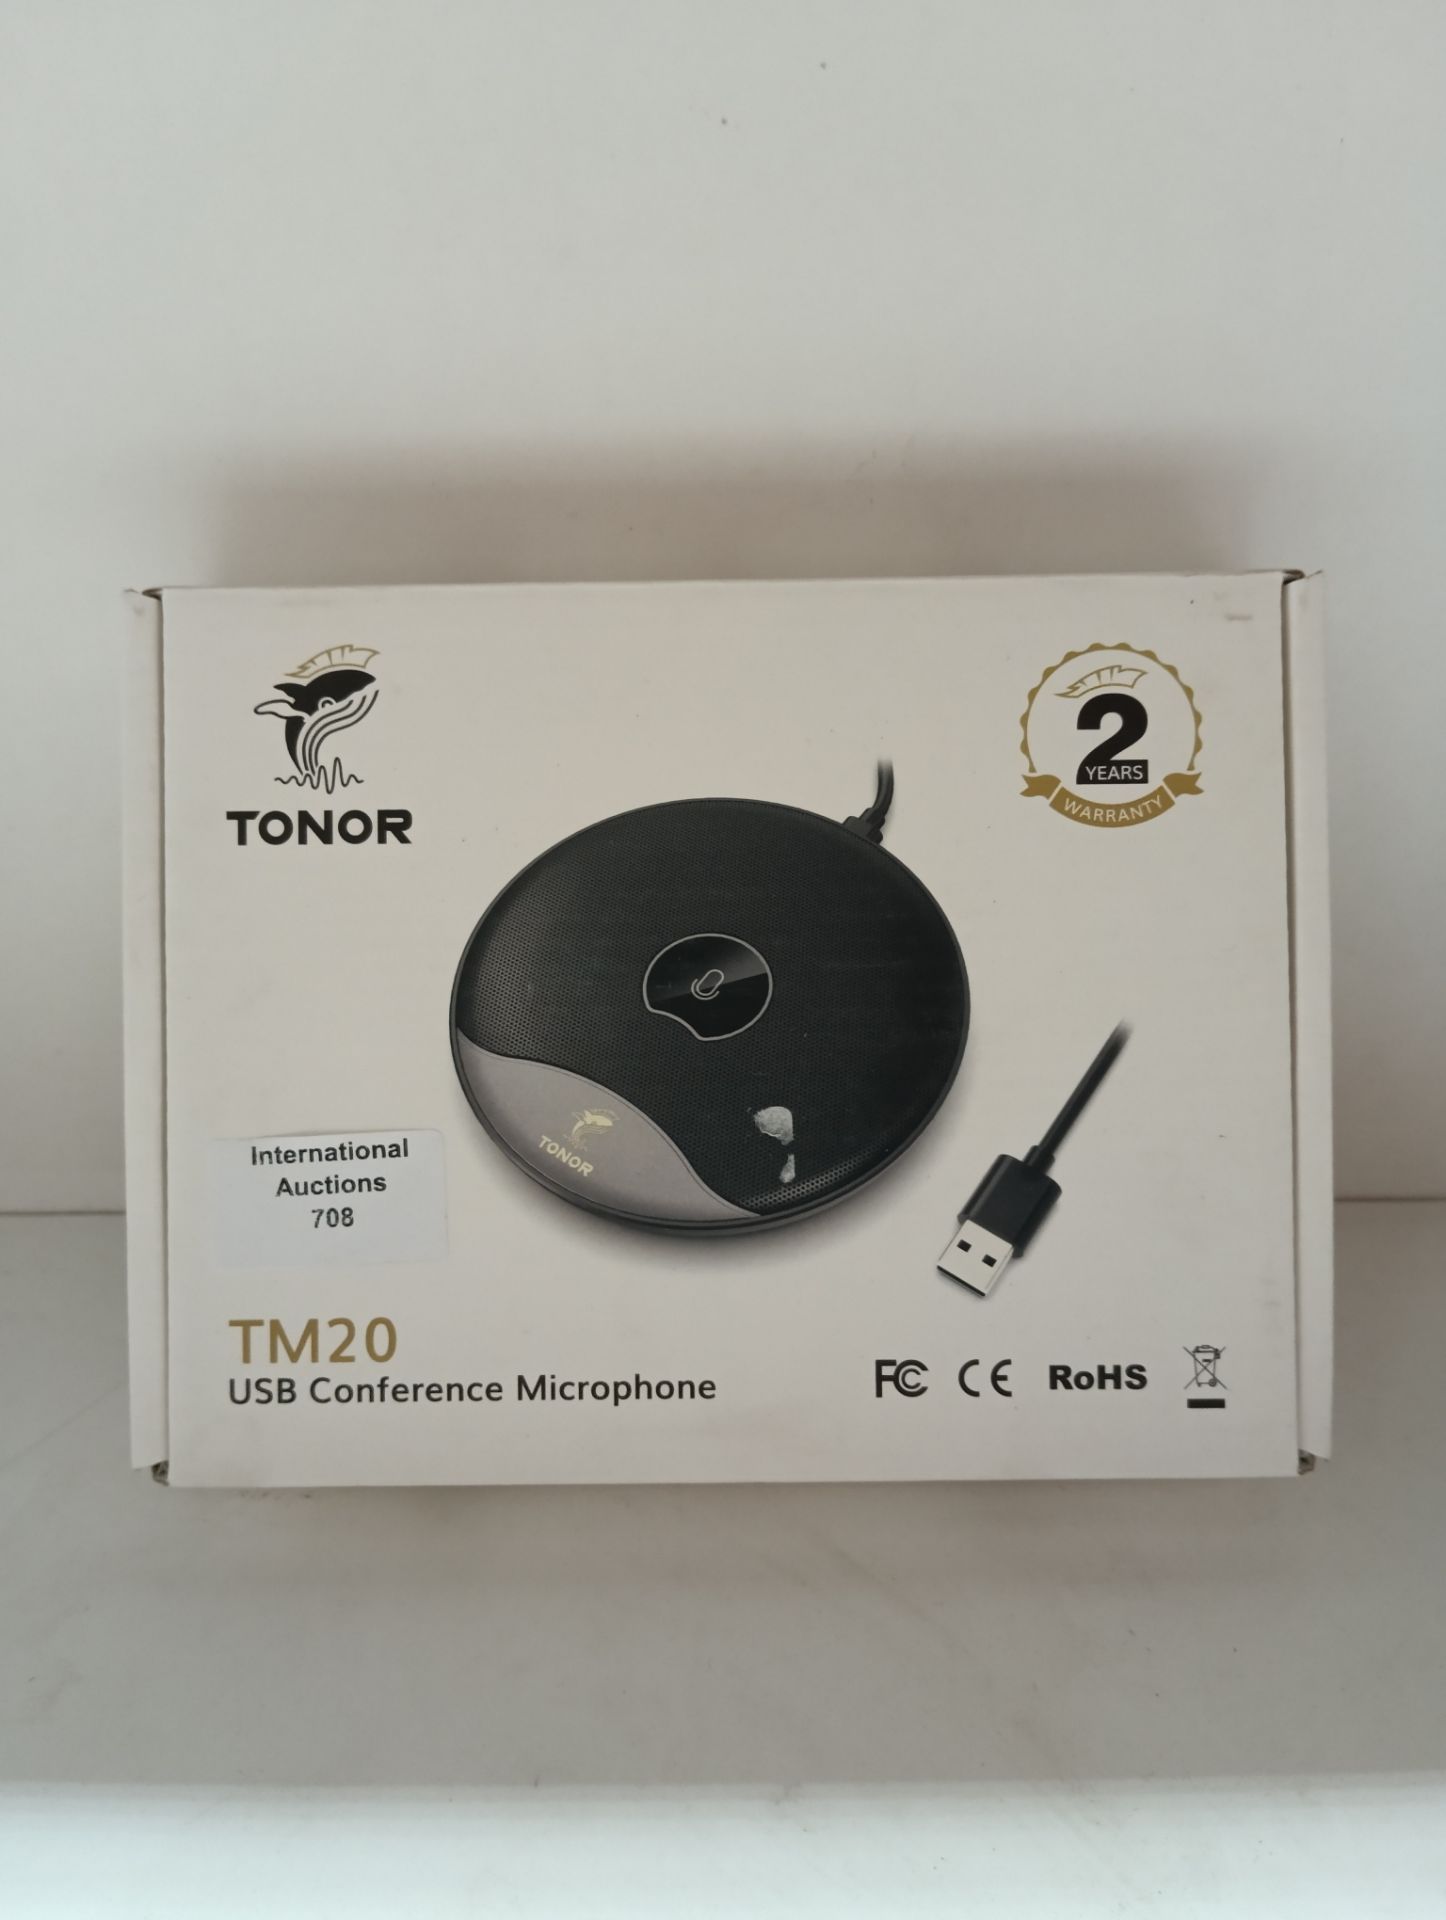 RRP £36.84 TONOR USB Conference Microphone - Image 2 of 2